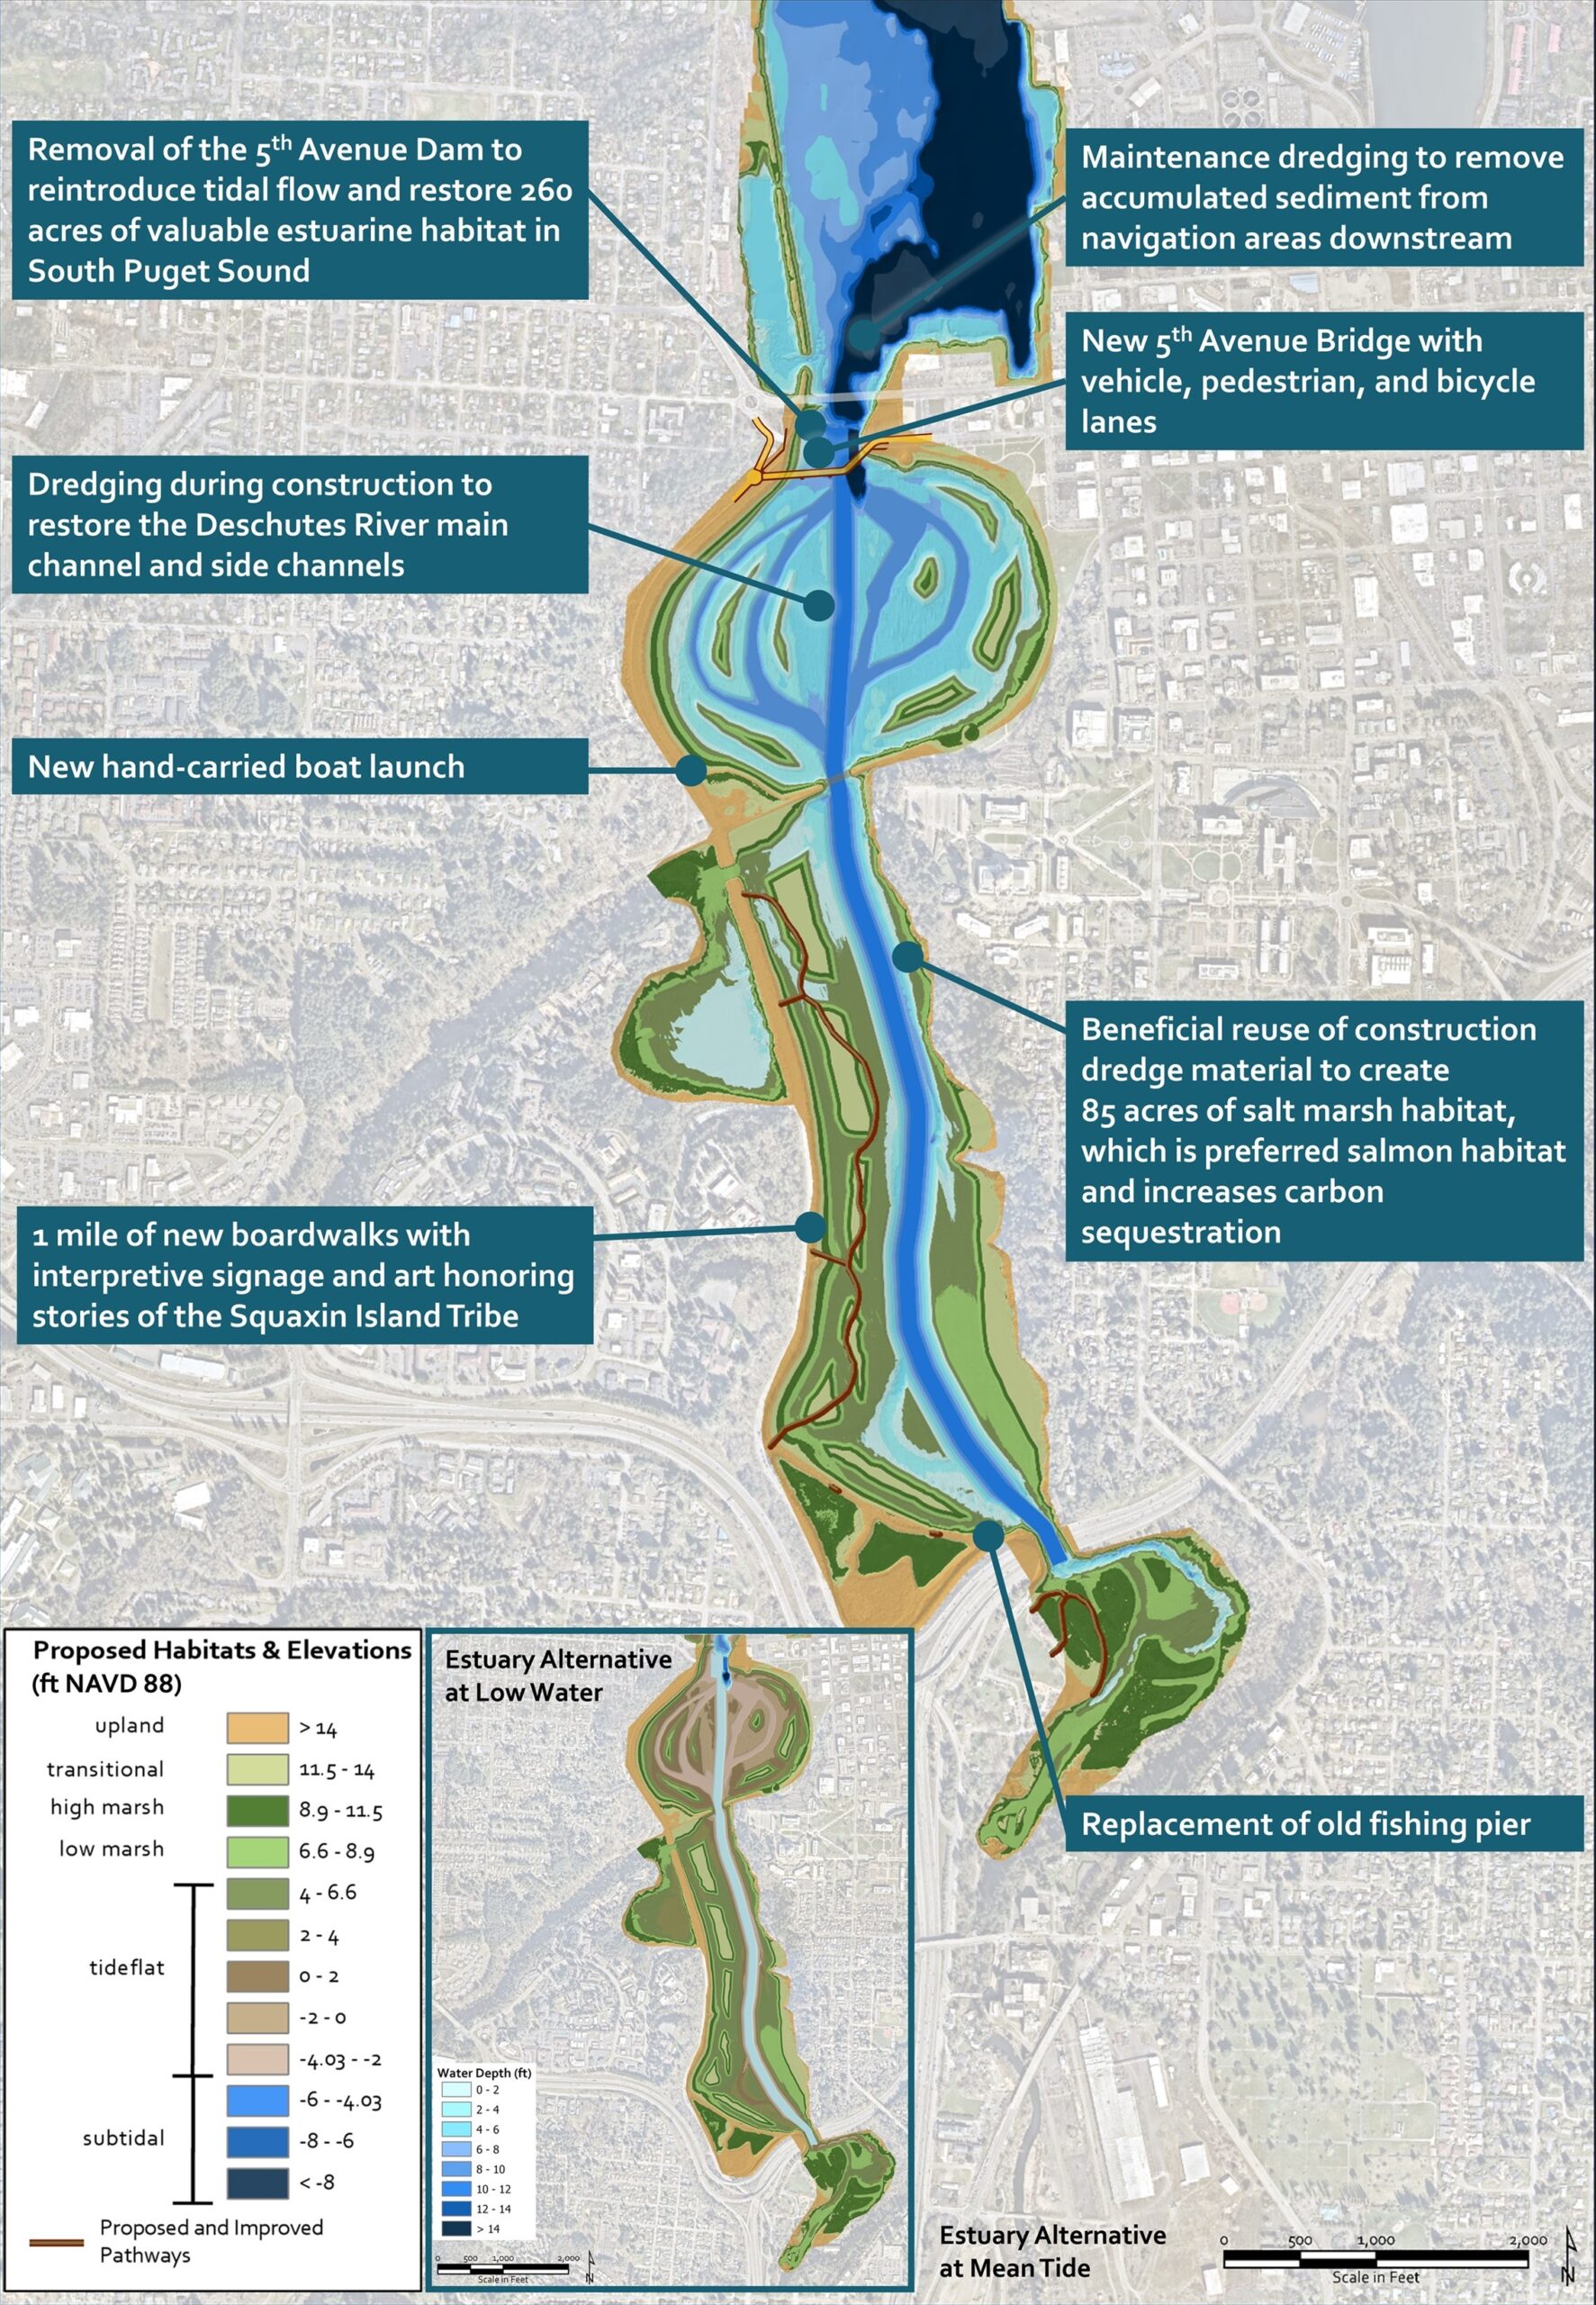 A map of the project area with callouts to conceptual design elements. Text reads (north to south): Removal of the 5th Avenue Dam to reintroduce tidal flow and restore 260 acres of valuable estuarine habitat in South Puget Sound; maintenance dredging to remove accumulated sediment from navigation areas downstream; new 5th Avenue Bridge with vehicle, pedestrian, and bicycle lanes, dredging during construction to restore the Deschutes River main channel and side channels; new hand-carried boat launch; beneficial reuse of construction dredge material to create 85 acres of salt marsh habitat, which is preferred salmon habitat and increases carbon sequestration; 1 mile of new boardwalks with interpretive signage and art honoring stories of the Squaxin Island Tribe; replacement of old fishing pier.